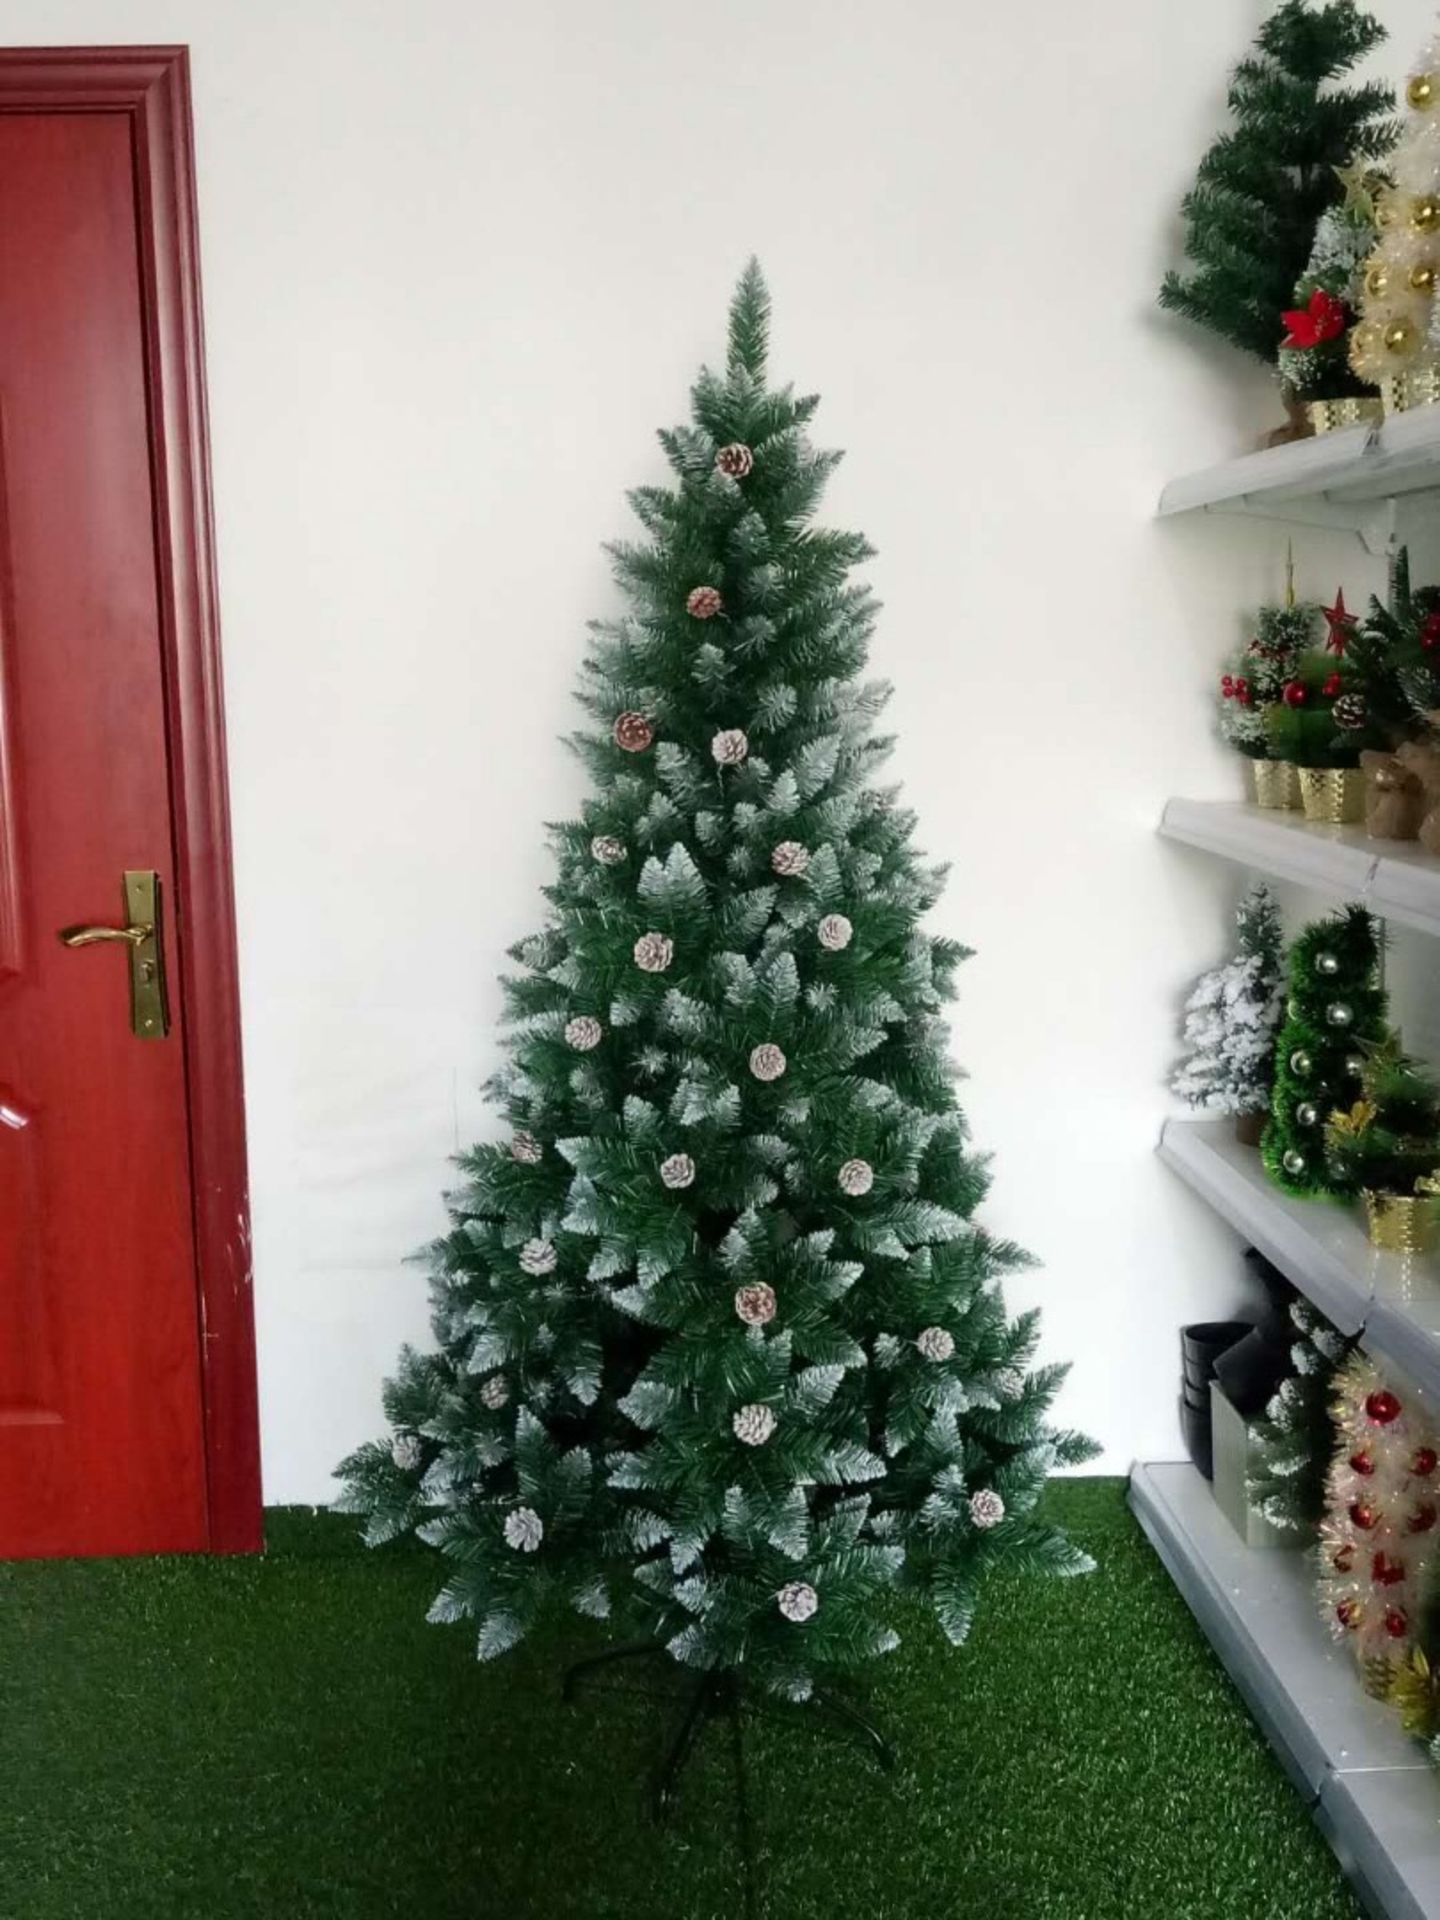 + VAT Brand New "Noel" Luxury 7ft Snowy Spruce Christmas Tree With Pine Cone Decoration And Frosted